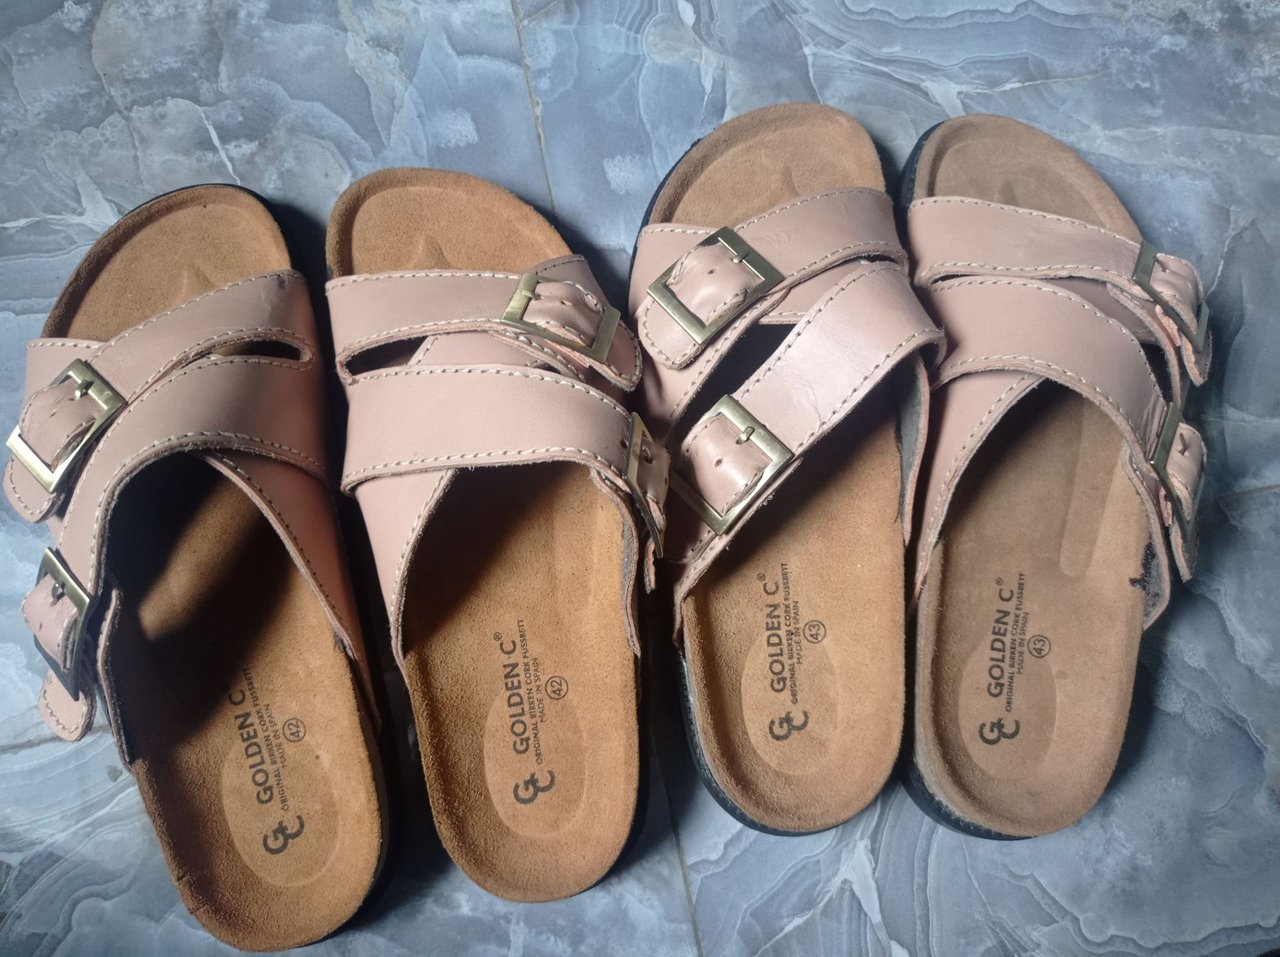 MAKING TWO DOUBLE-CROSS STRAP BIRKENSTOCK PALM SANDALS FOR A HIVER